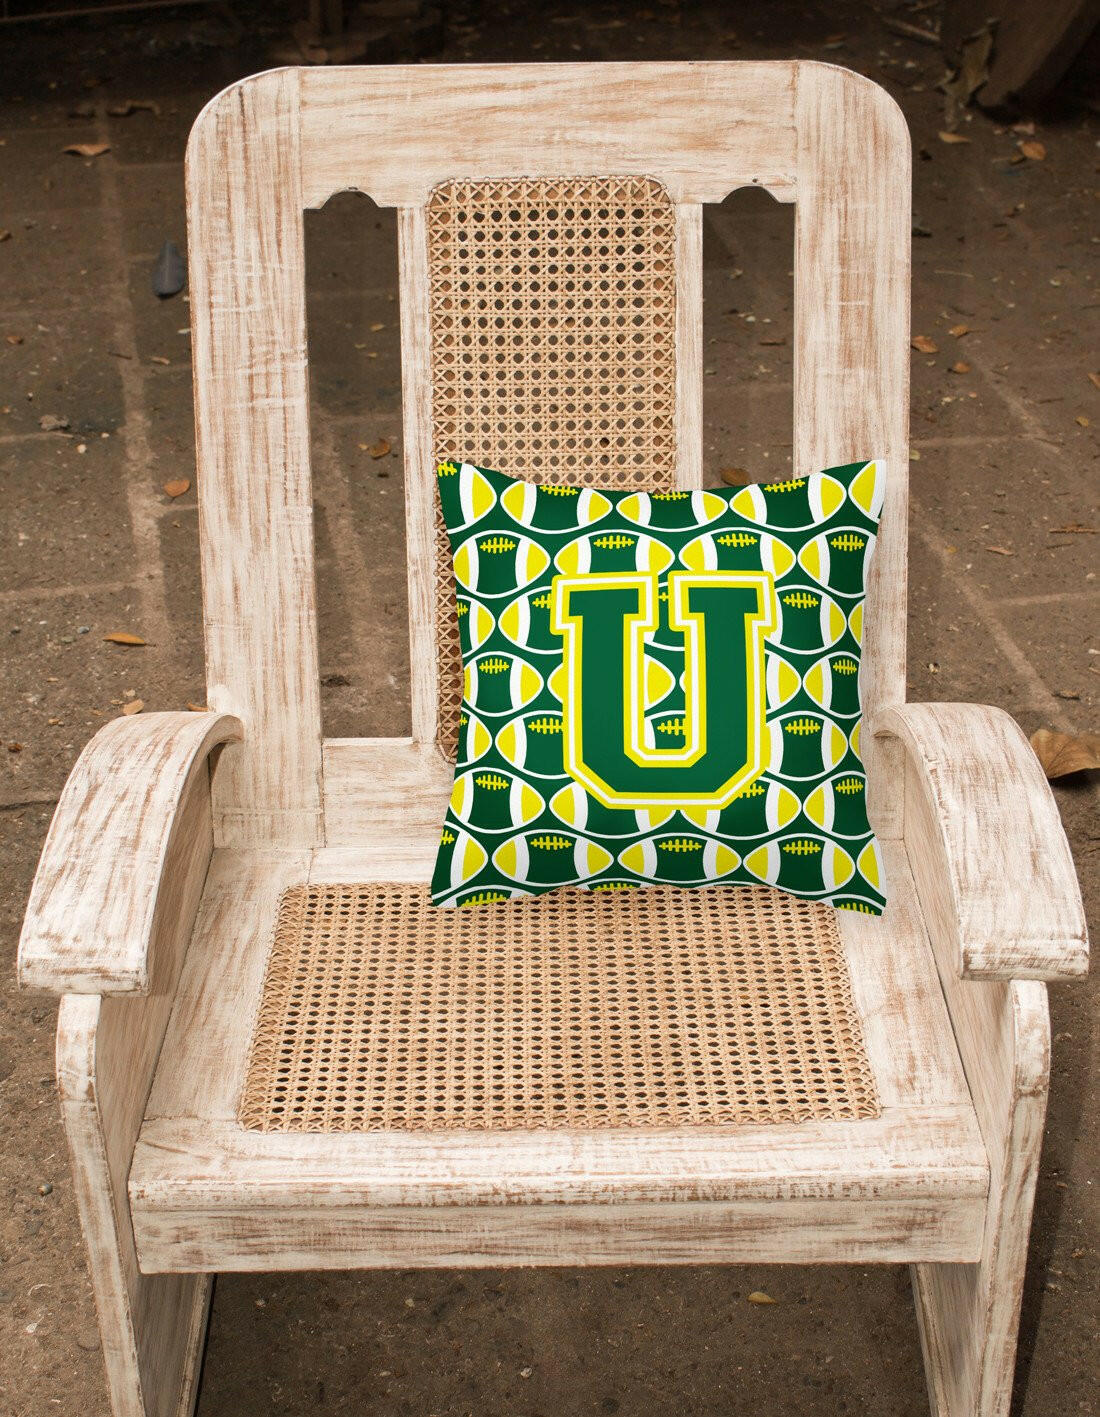 Letter U Football Green and Yellow Fabric Decorative Pillow CJ1075-UPW1414 by Caroline's Treasures